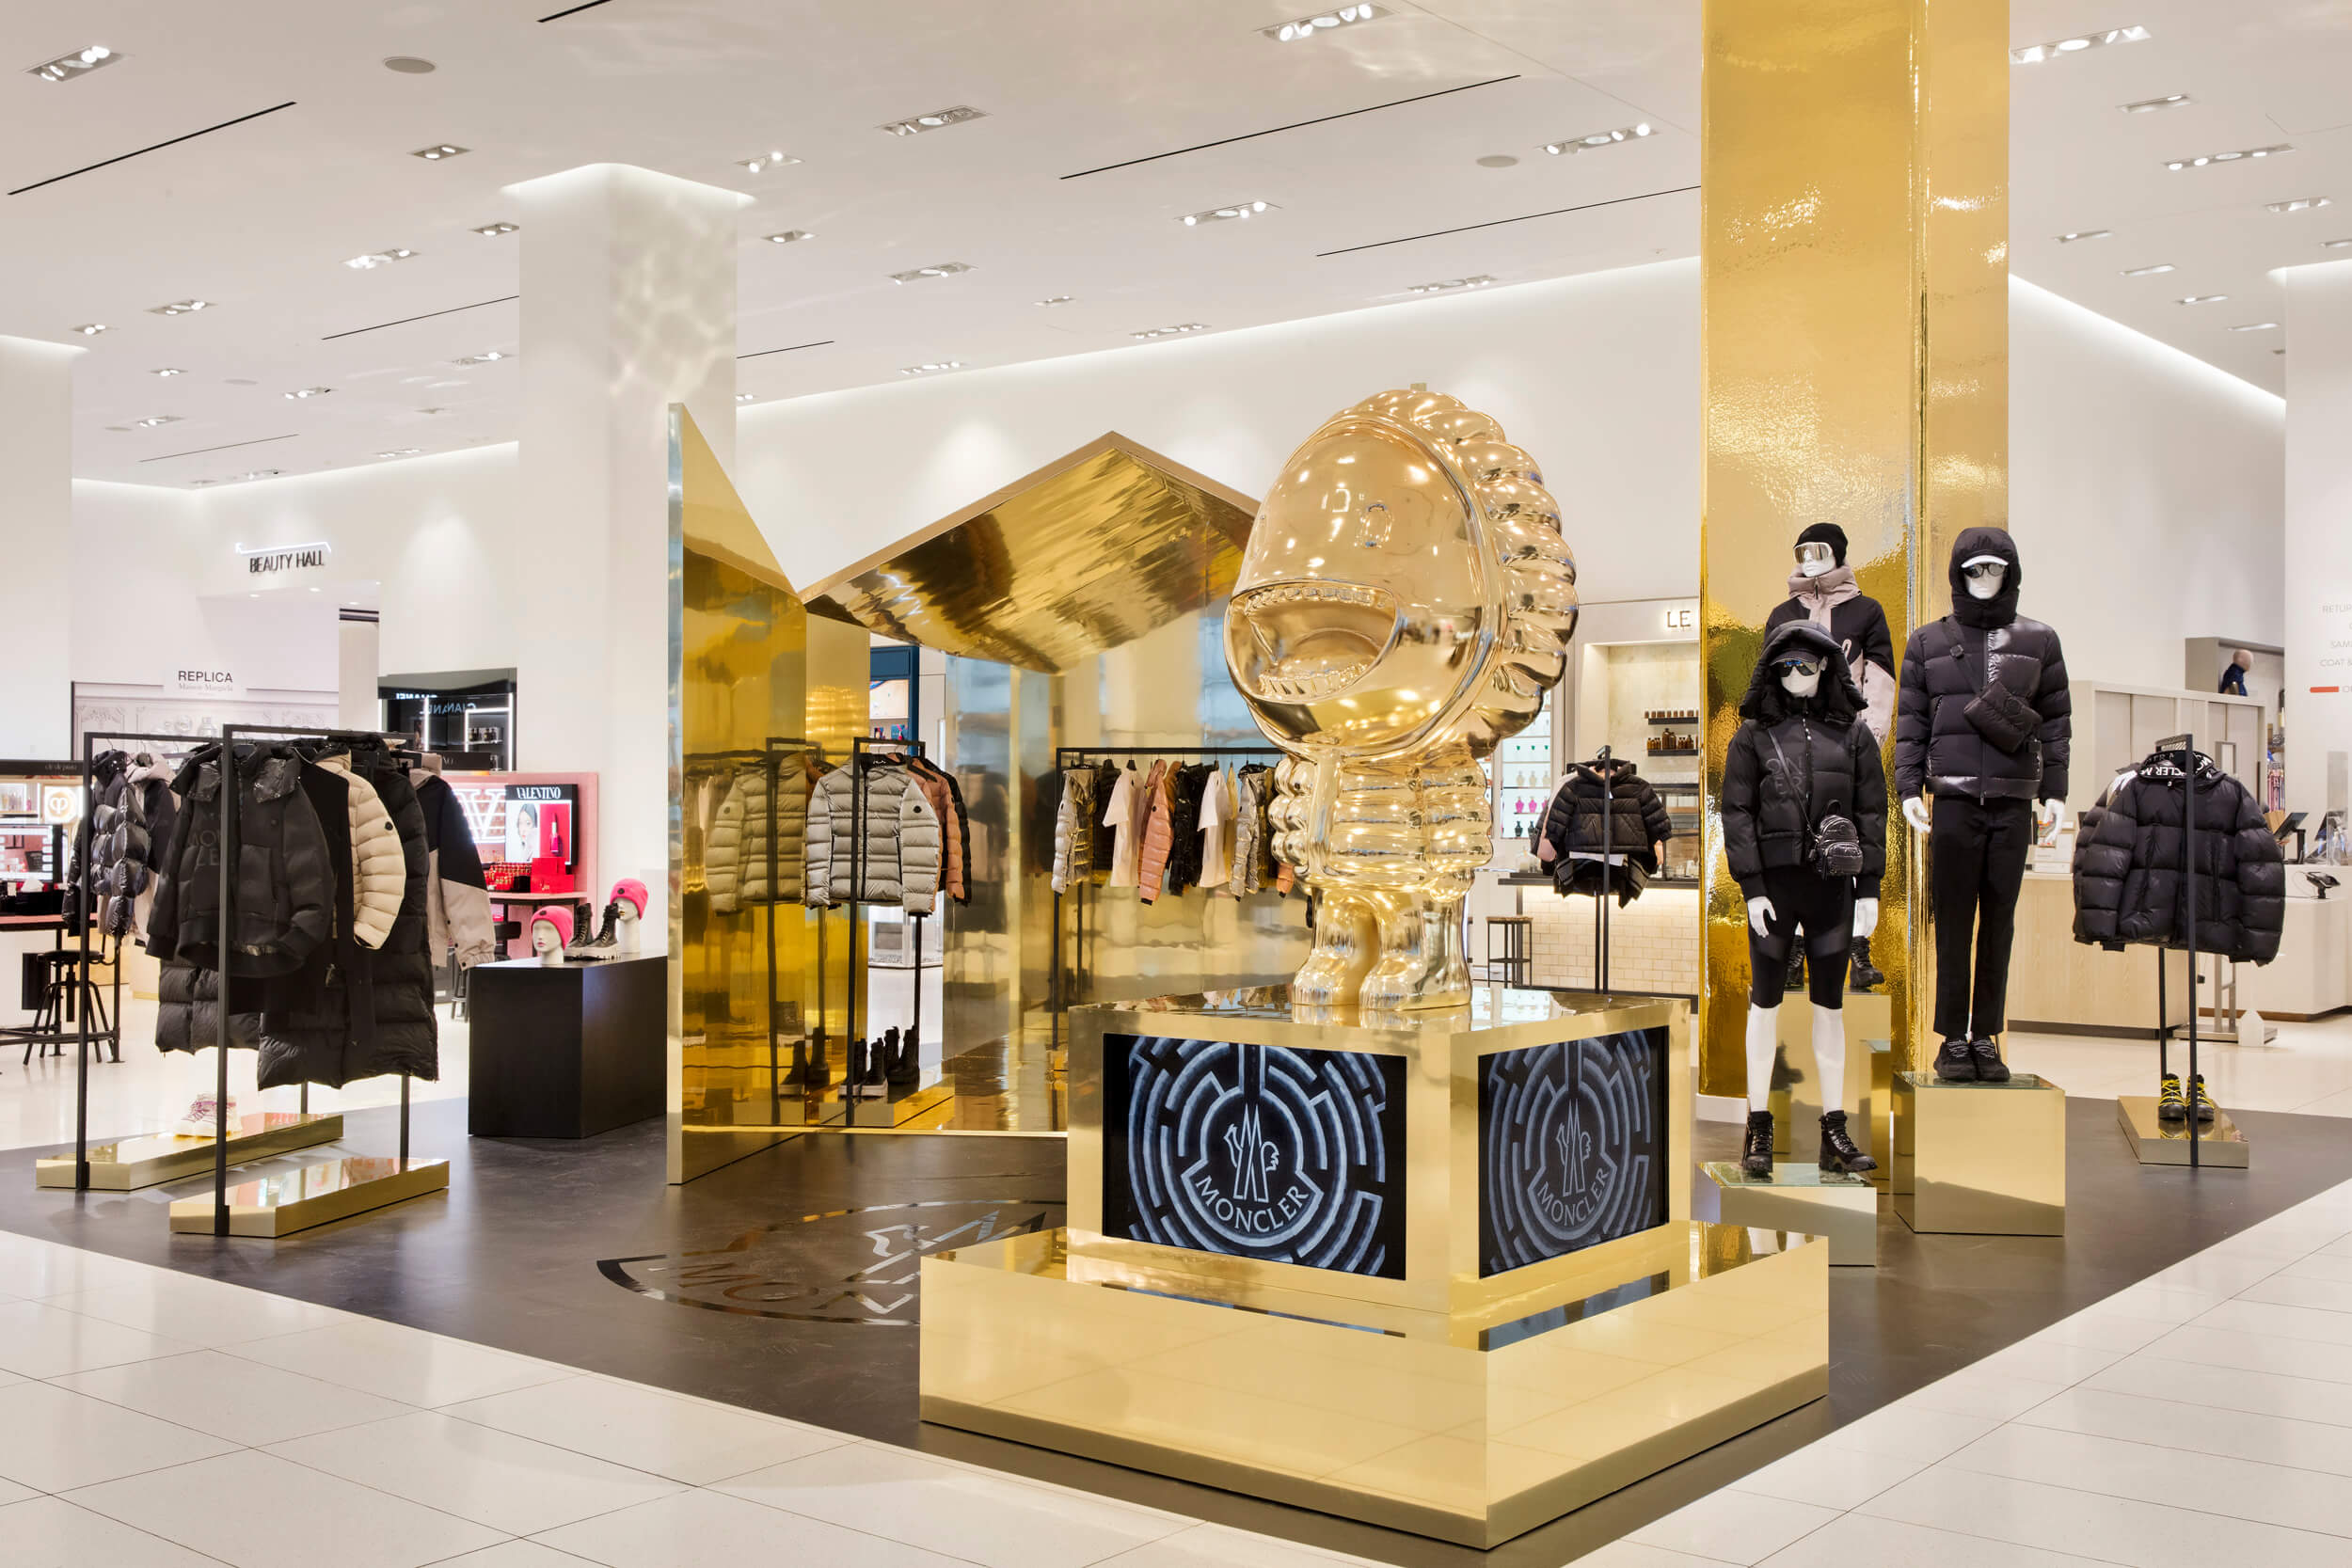 Nordstrom NYC Flagship Gives a Home to Home Products - Retail TouchPoints